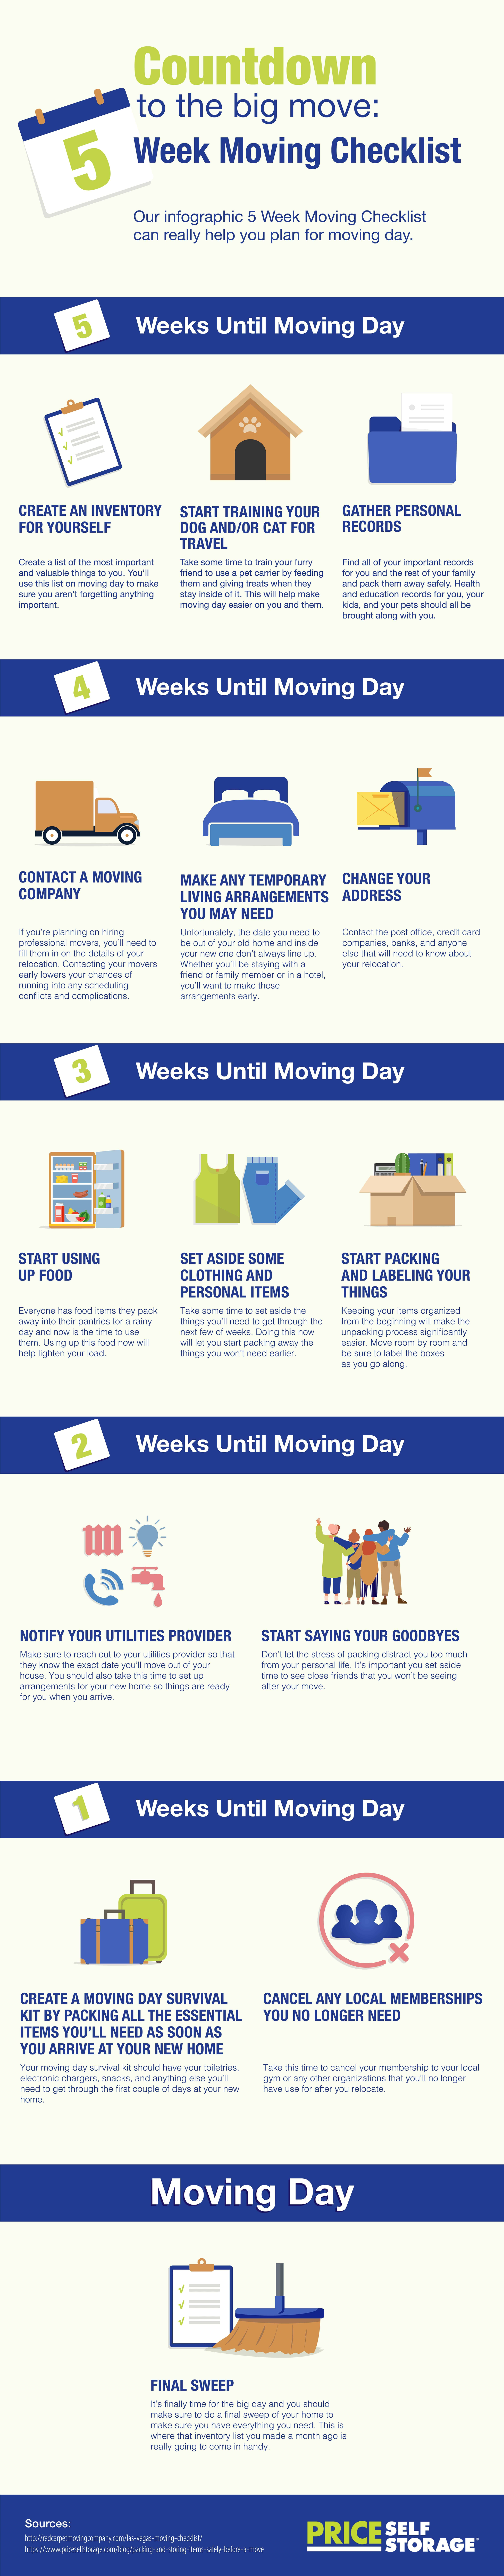 Moving day checklist infographic